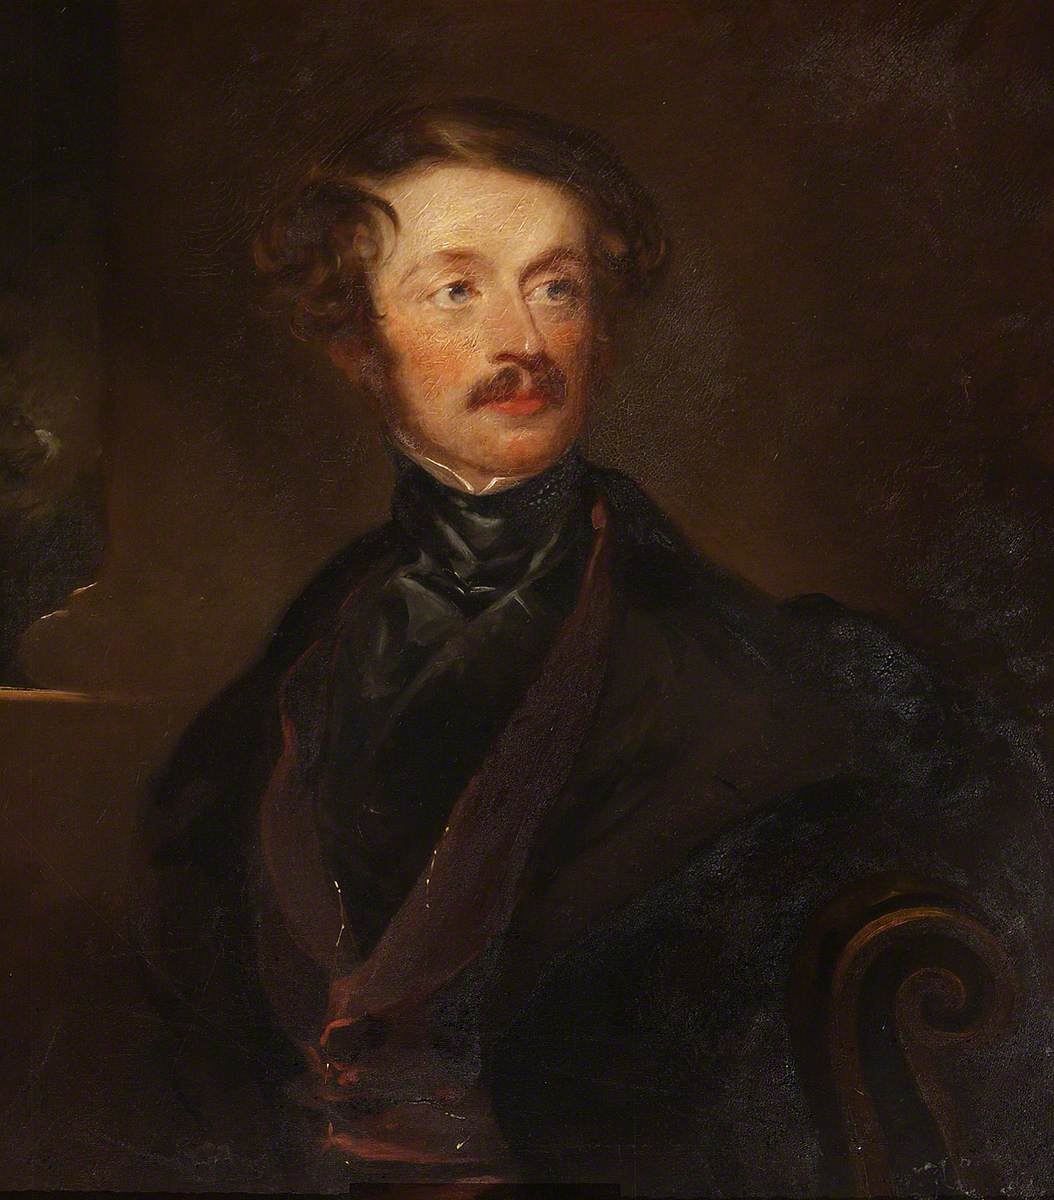 George William Frederick Brudenell-Bruce (1804–1878), 2nd Marquess of Ailesbury & 8th Earl of Cardigan, KG, PC